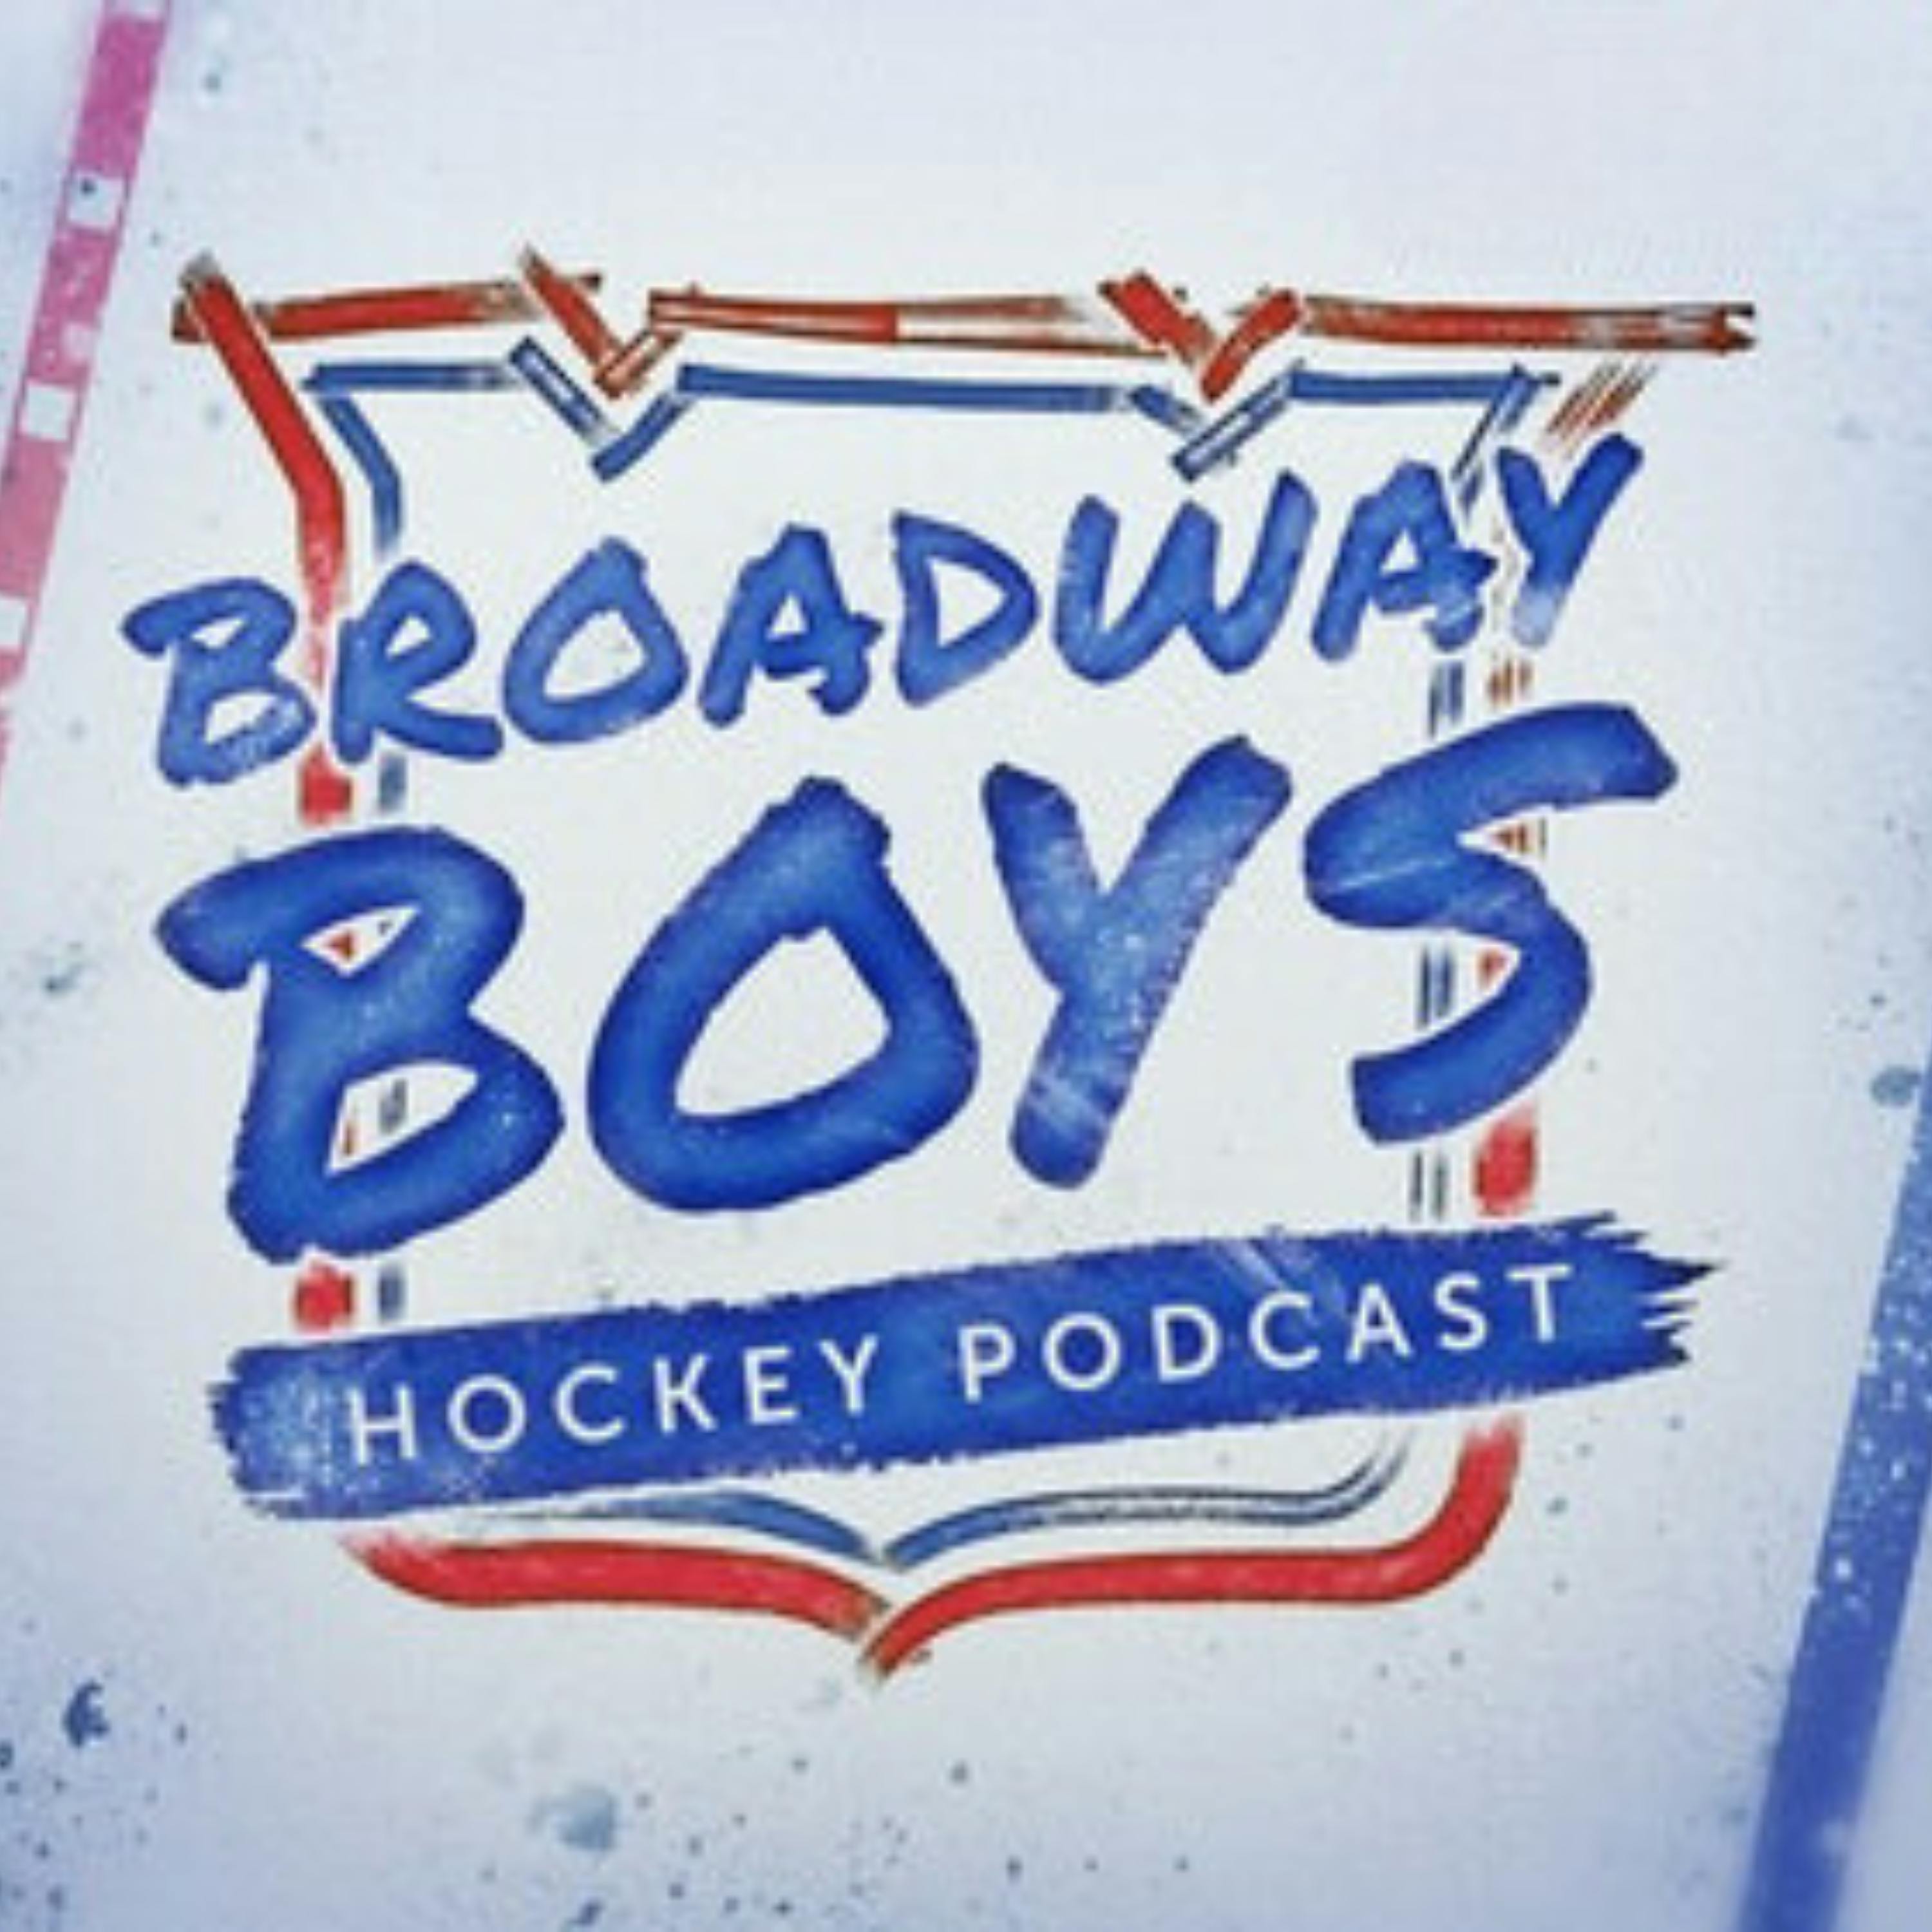 Broadway Boys Hockey Podcast - EP58 - "PACE YOURSELF"